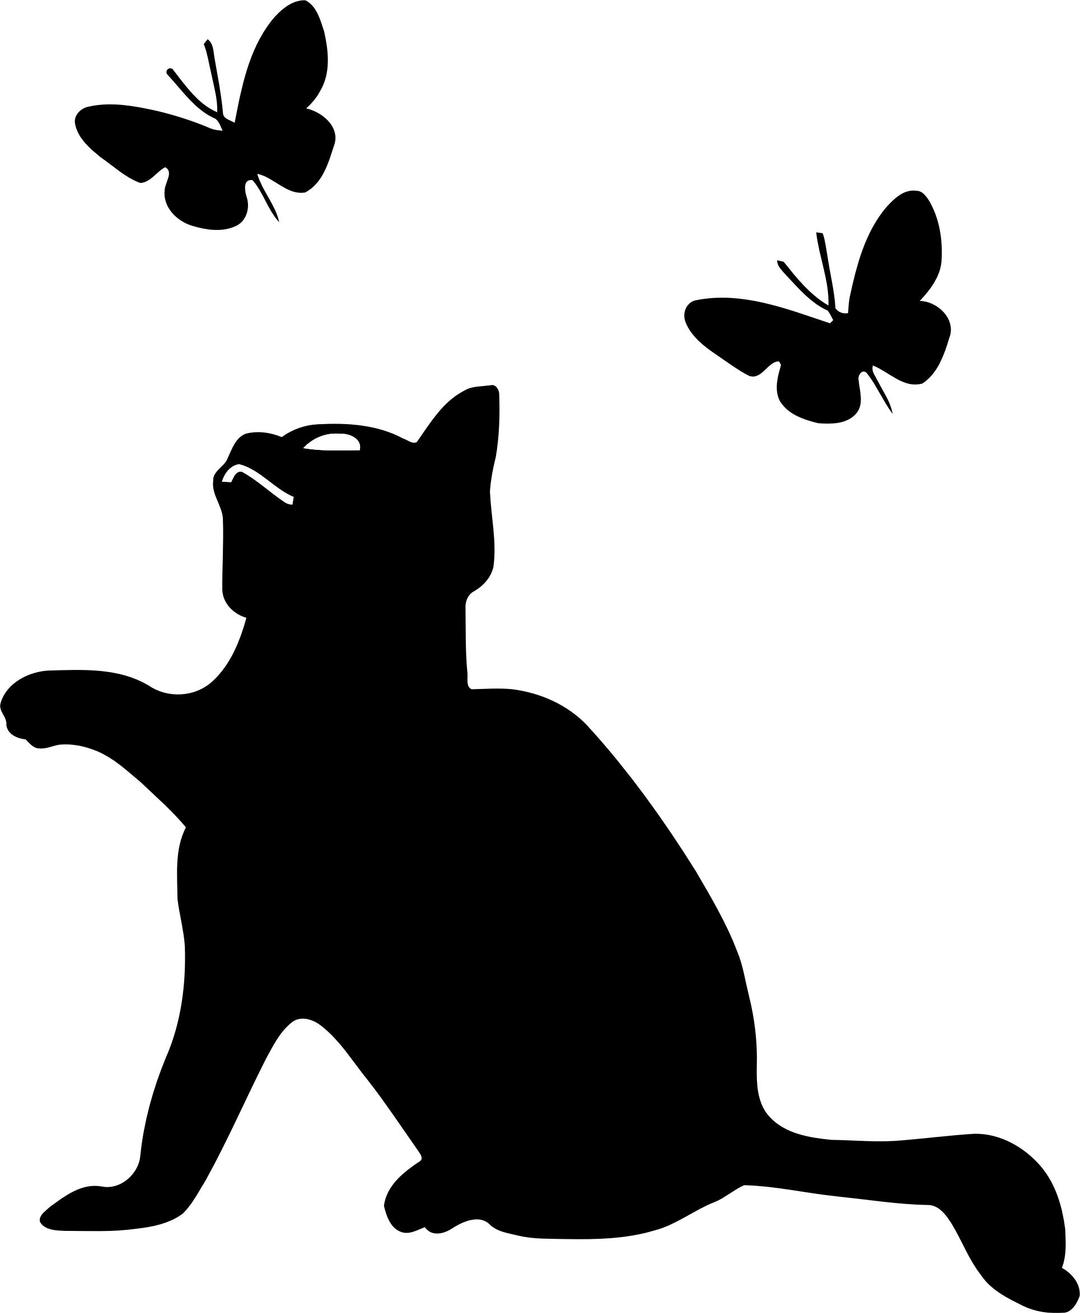 Kitten Playing With Butterflies Icon png transparent